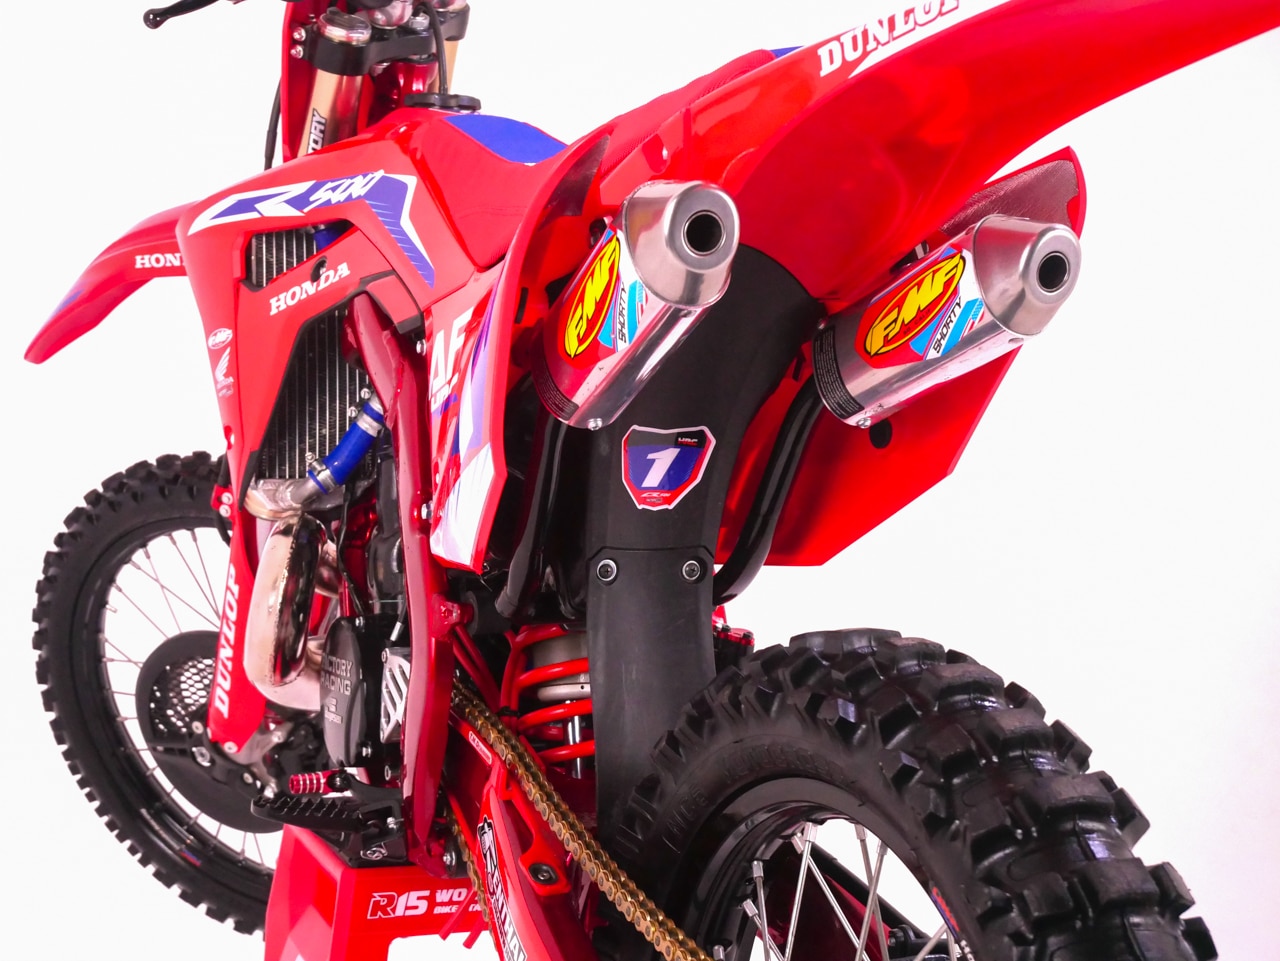 TWO-STROKE TUESDAY | DUAL EXHAUST 1988 CR500 ENGINE SHOEHORNED INTO NEW  CHASSIS - Motocross Action Magazine